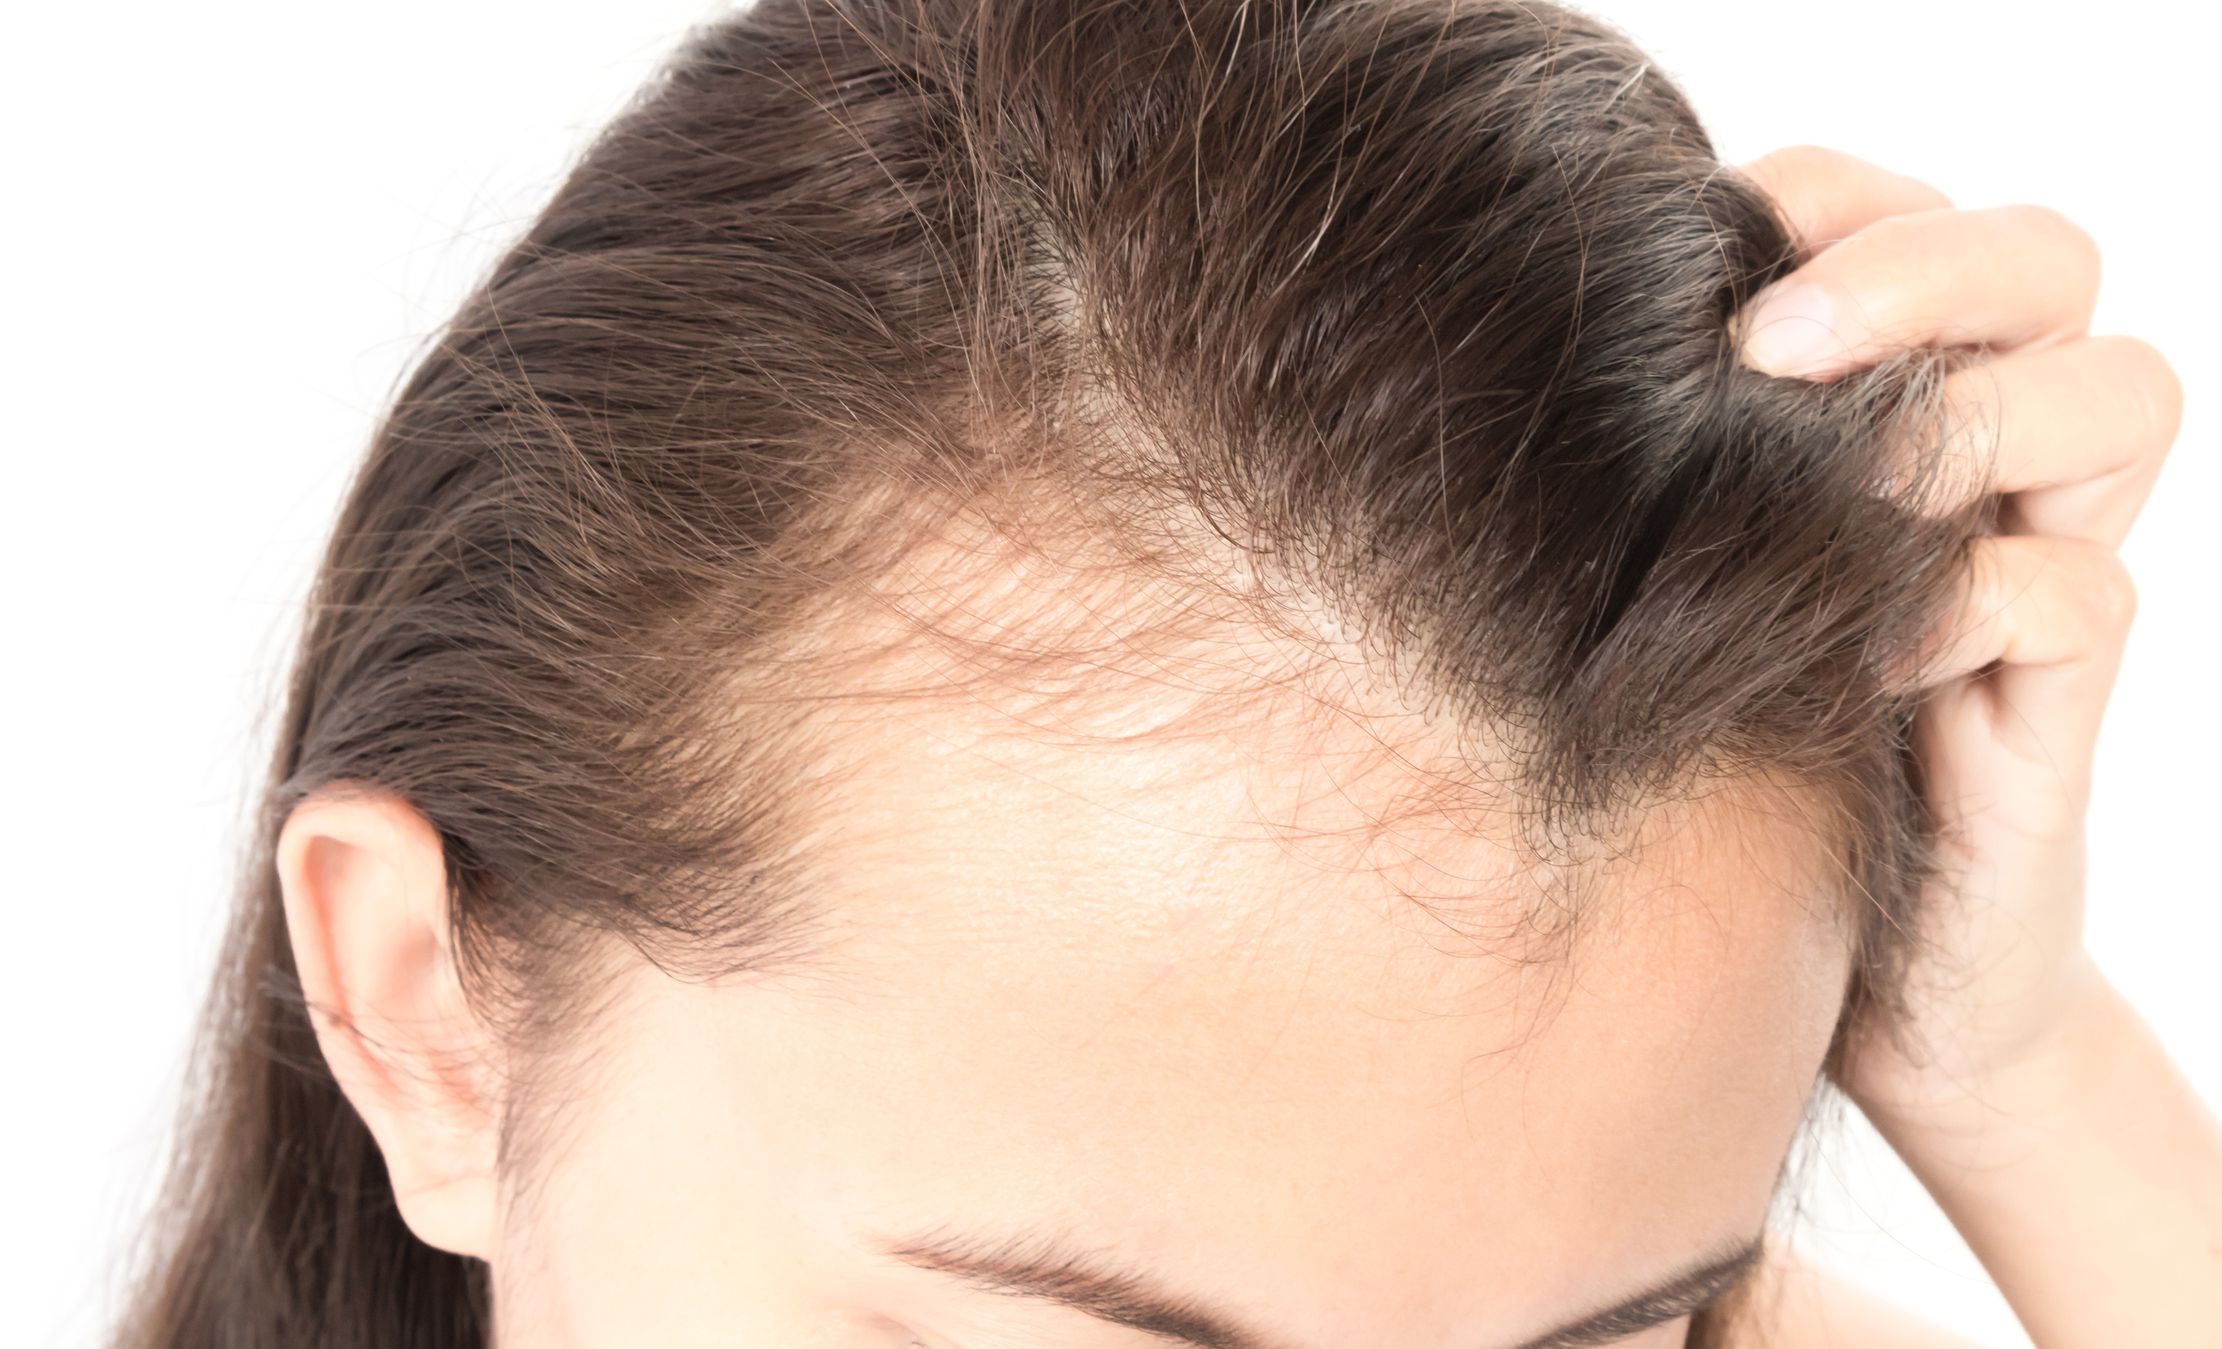 Can Food Allergies Cause Hair Loss?